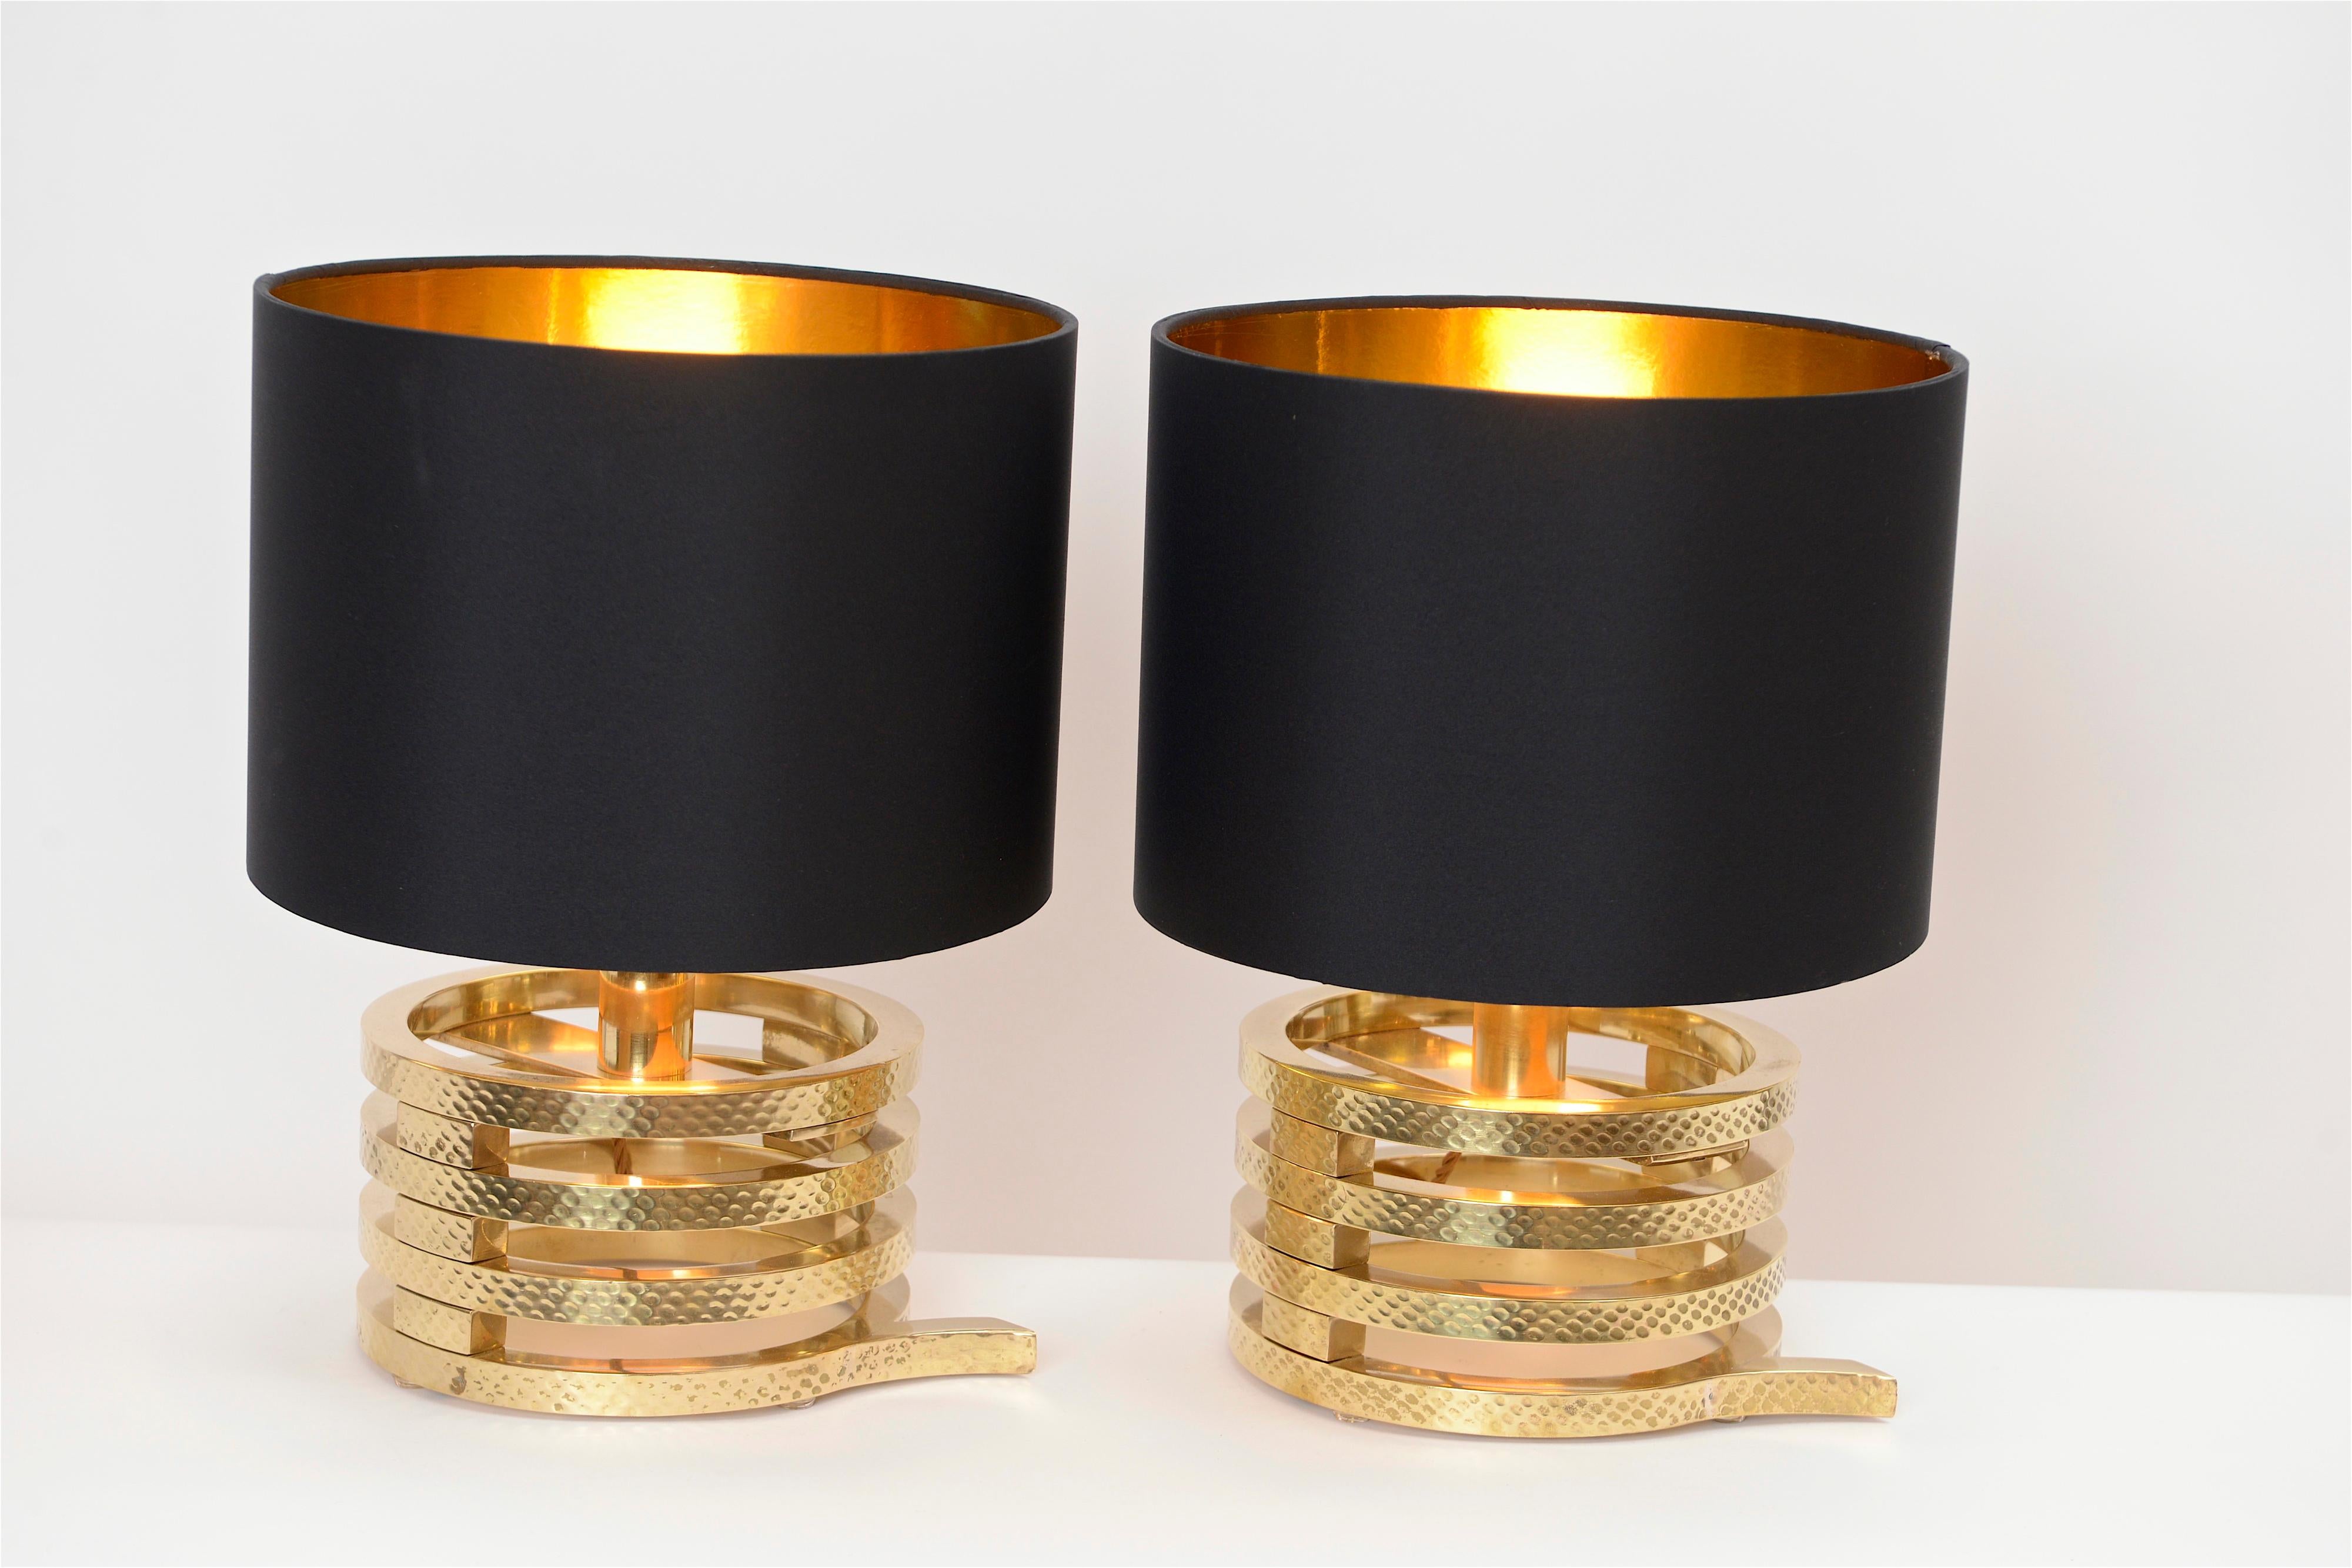 A fantastic pair of high quality brass table lamps from the 1960s. The main body of the lamps are constructed from four solid brass rings with a decorative hammered finish. Reminiscent of designs by Osvaldo Borsani or Tommaso Barbi, these super